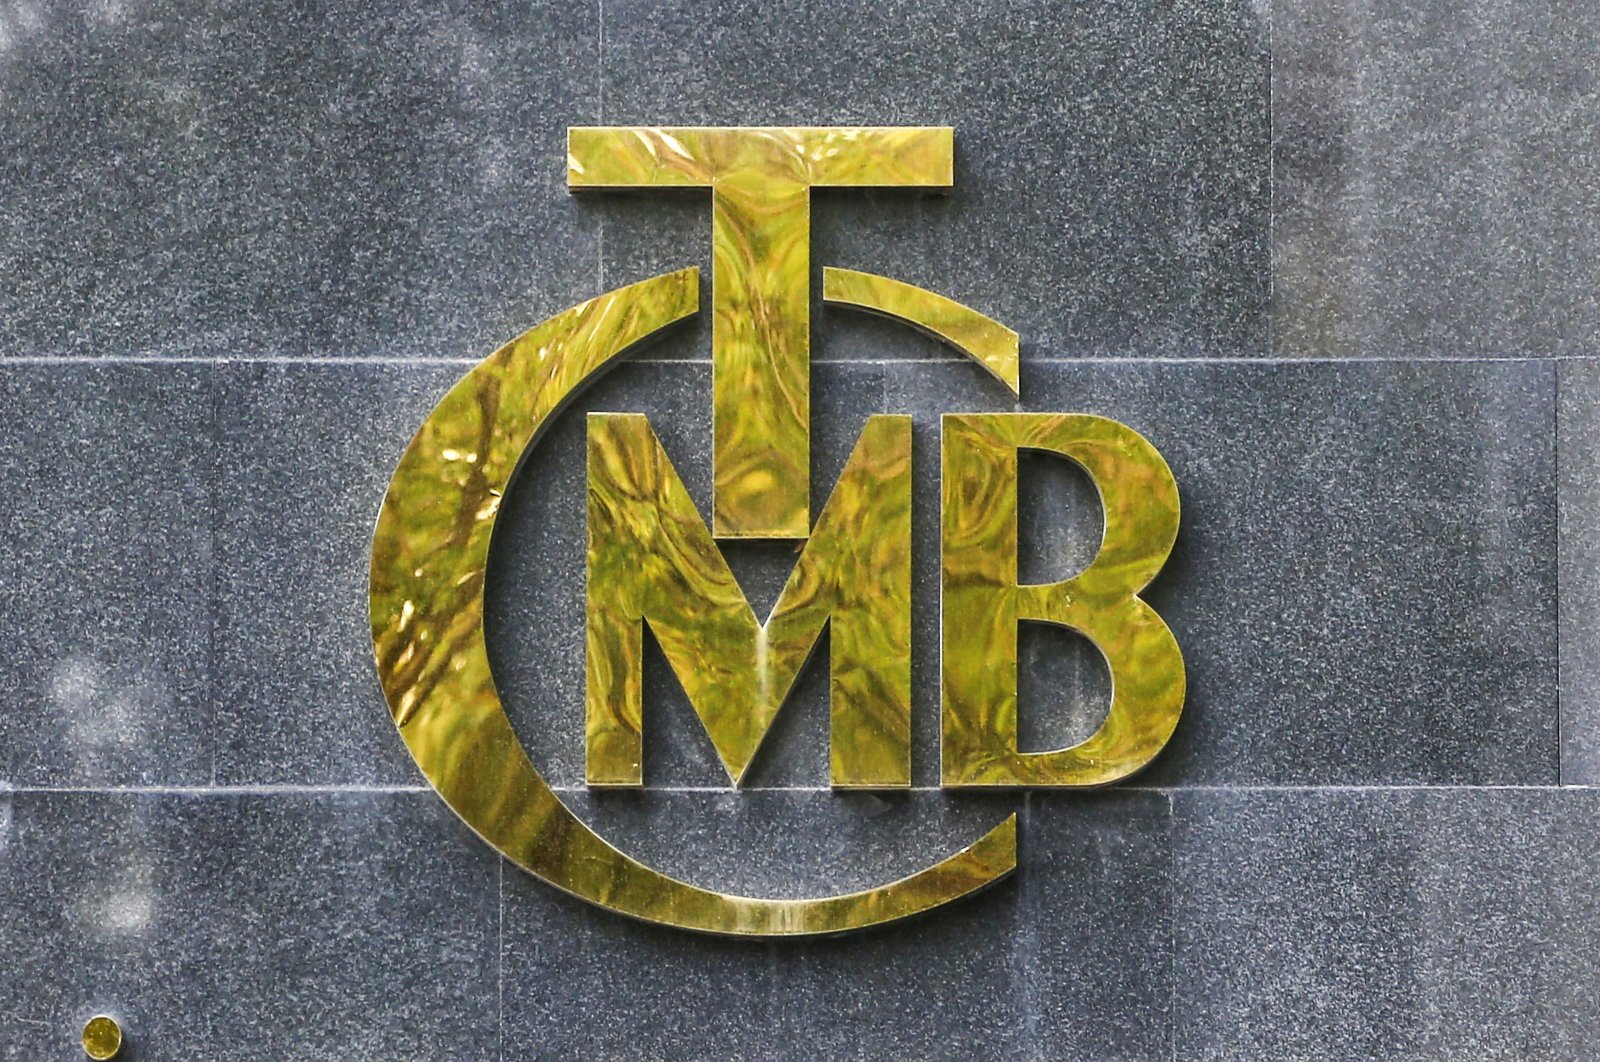 The logo of the Central Bank of the Republic of Turkish (CBRT) is pictured at the entrance of its headquarters in Ankara, Turkey, Oct., 15, 2021. (Reuters Photo)